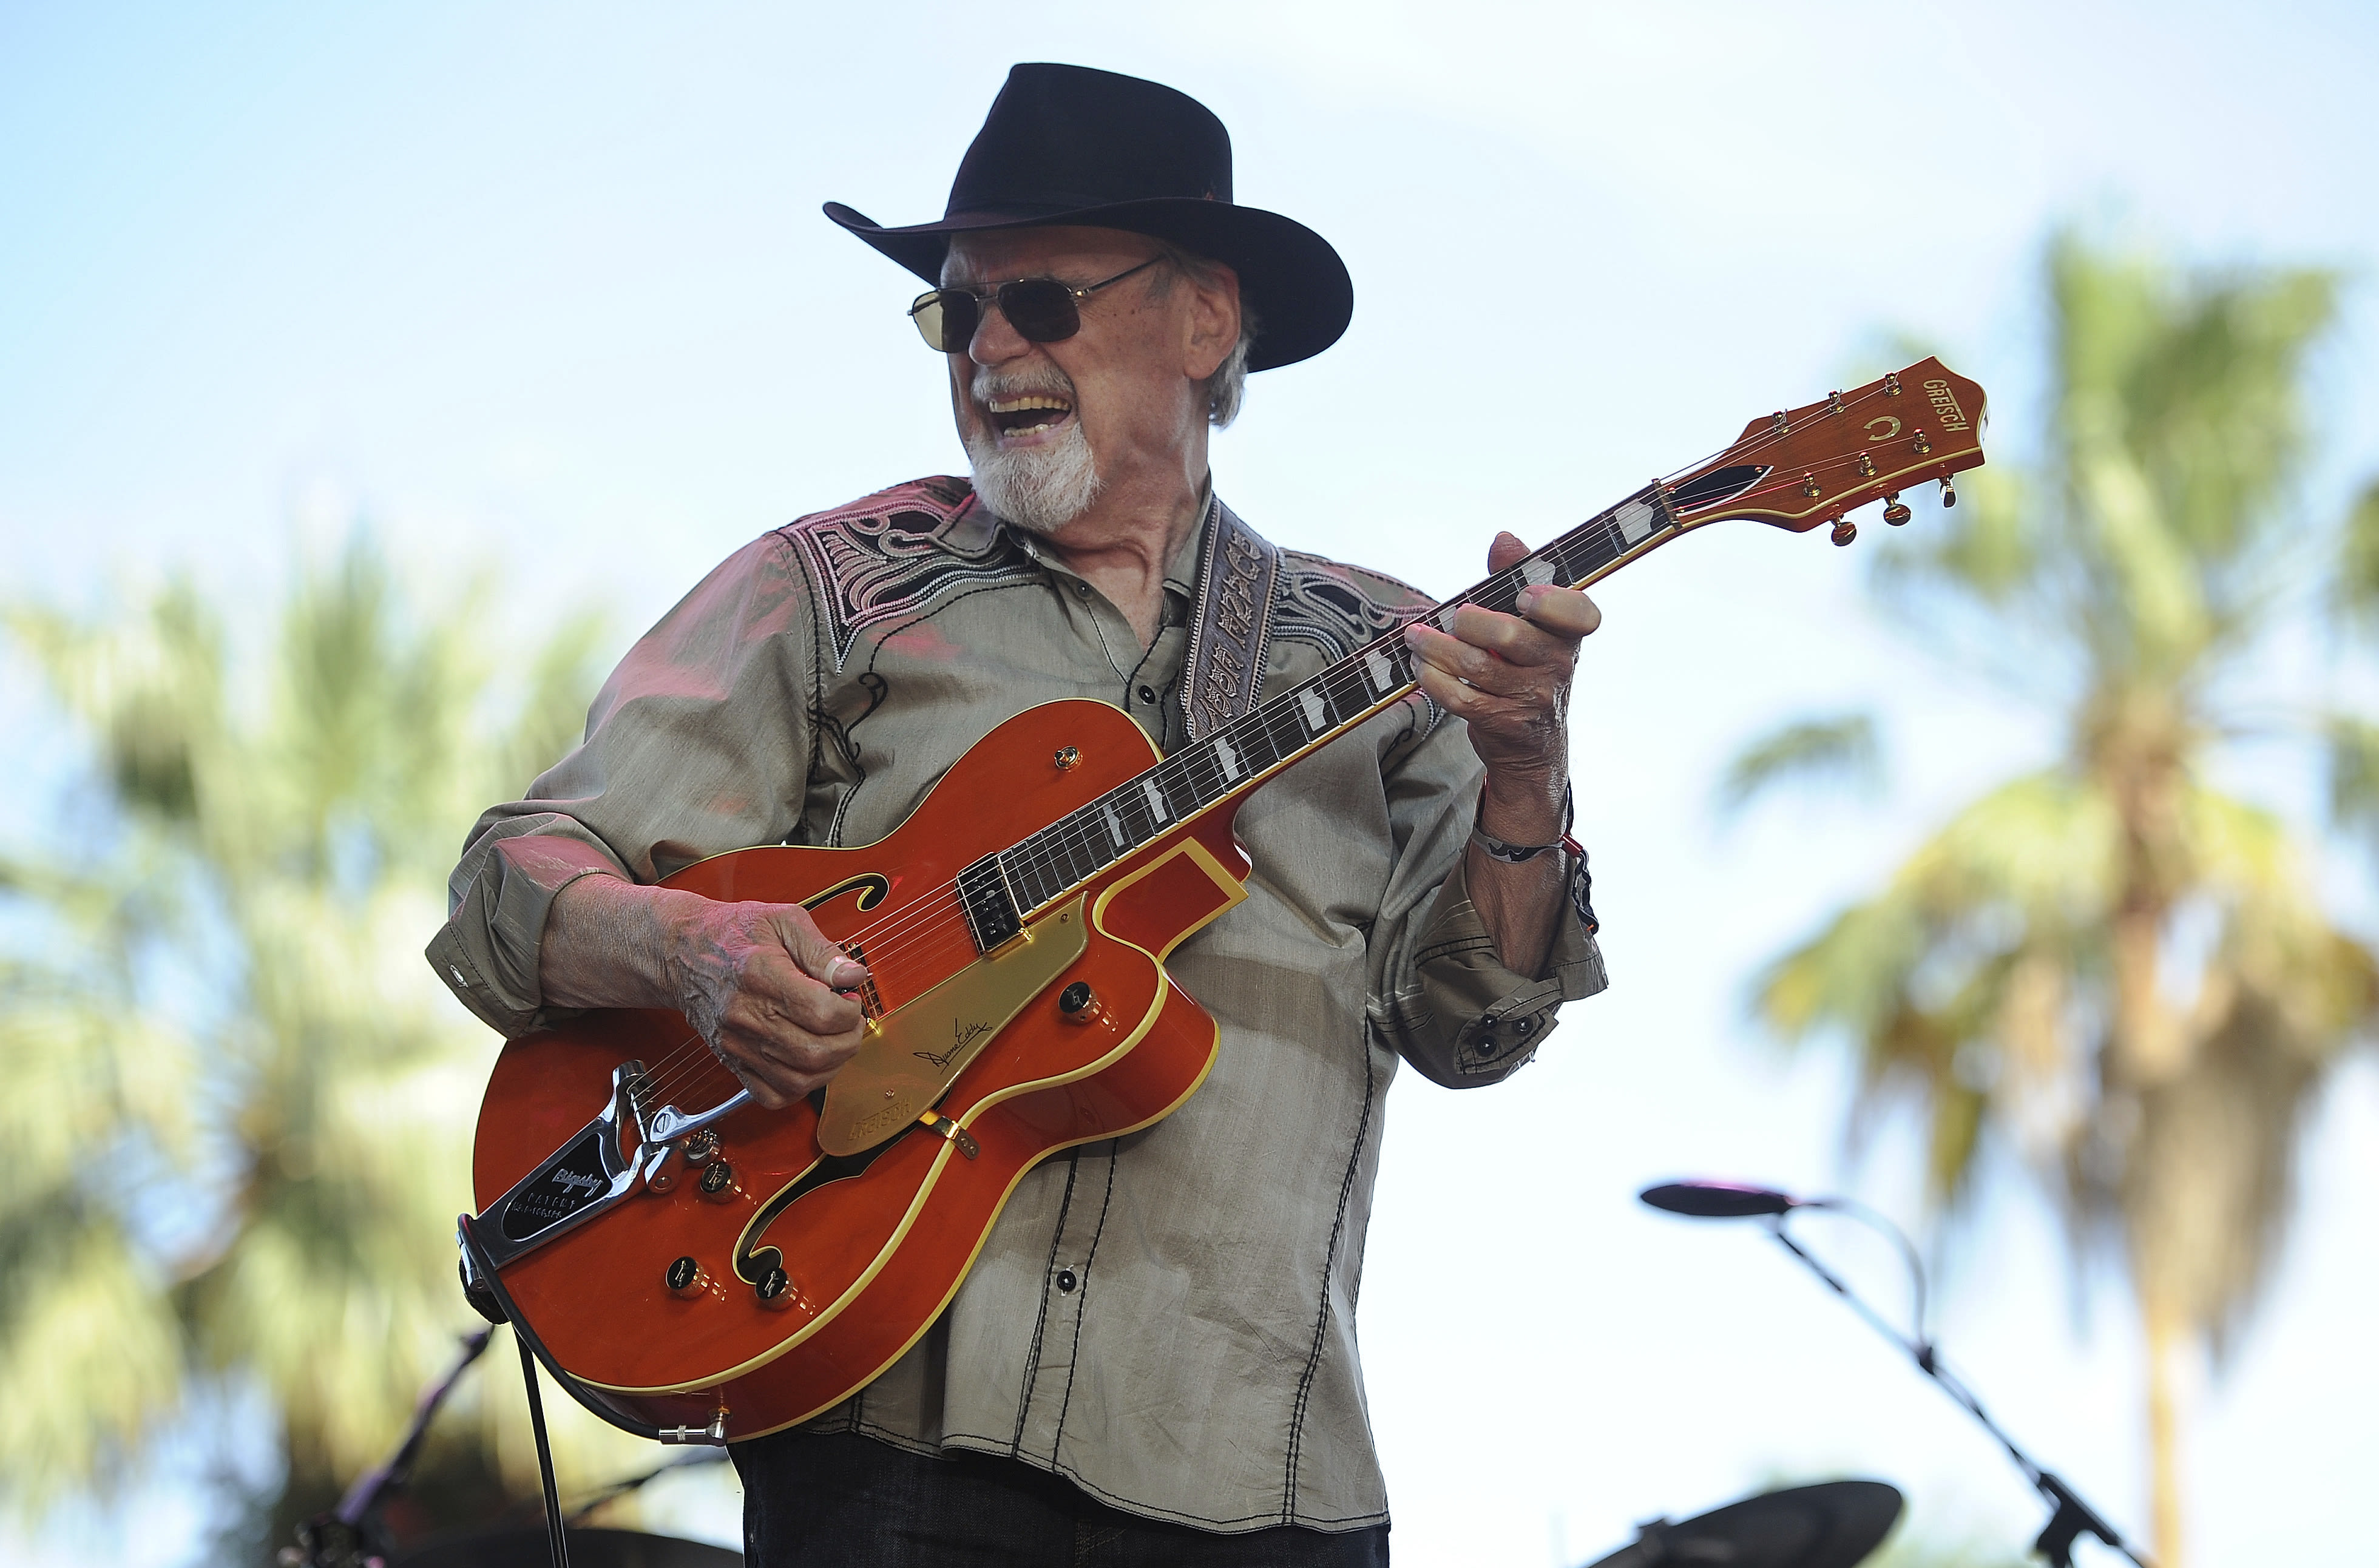 Duane Eddy, pioneering guitar hero and Rock and Roll Hall of Fame member, dies at 86